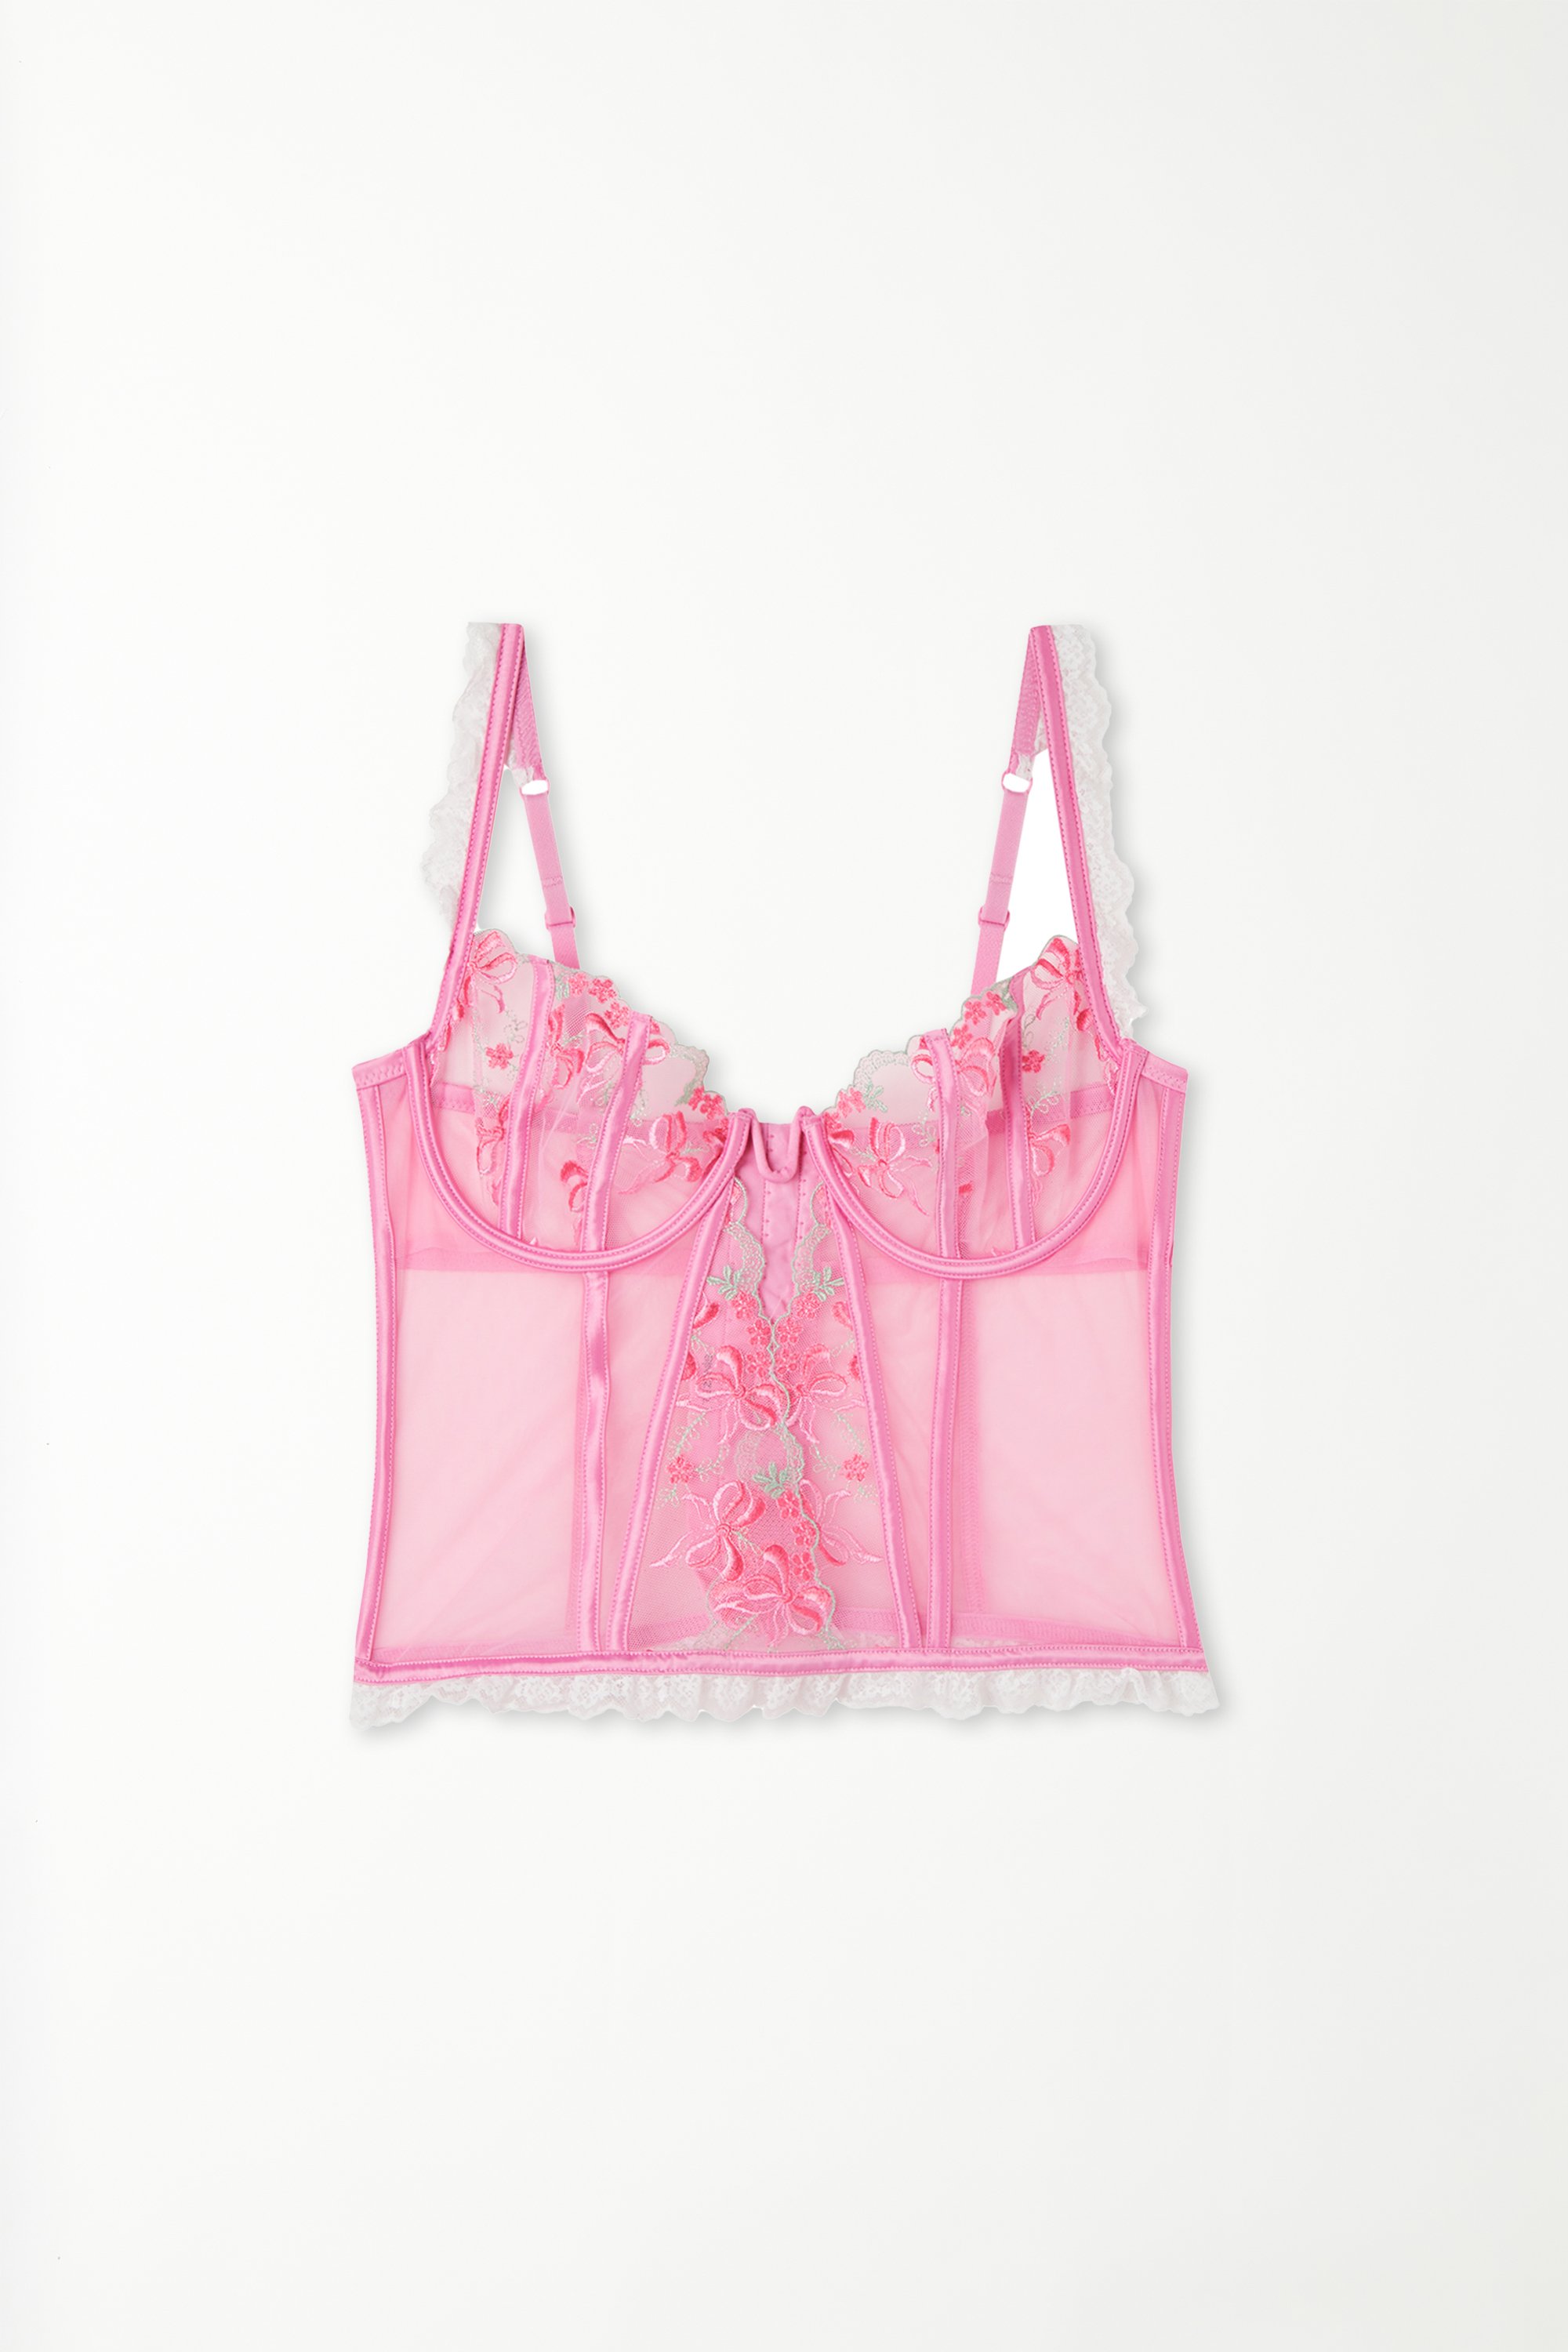 Corpete Bra Top Balconette Pink Candy Lace